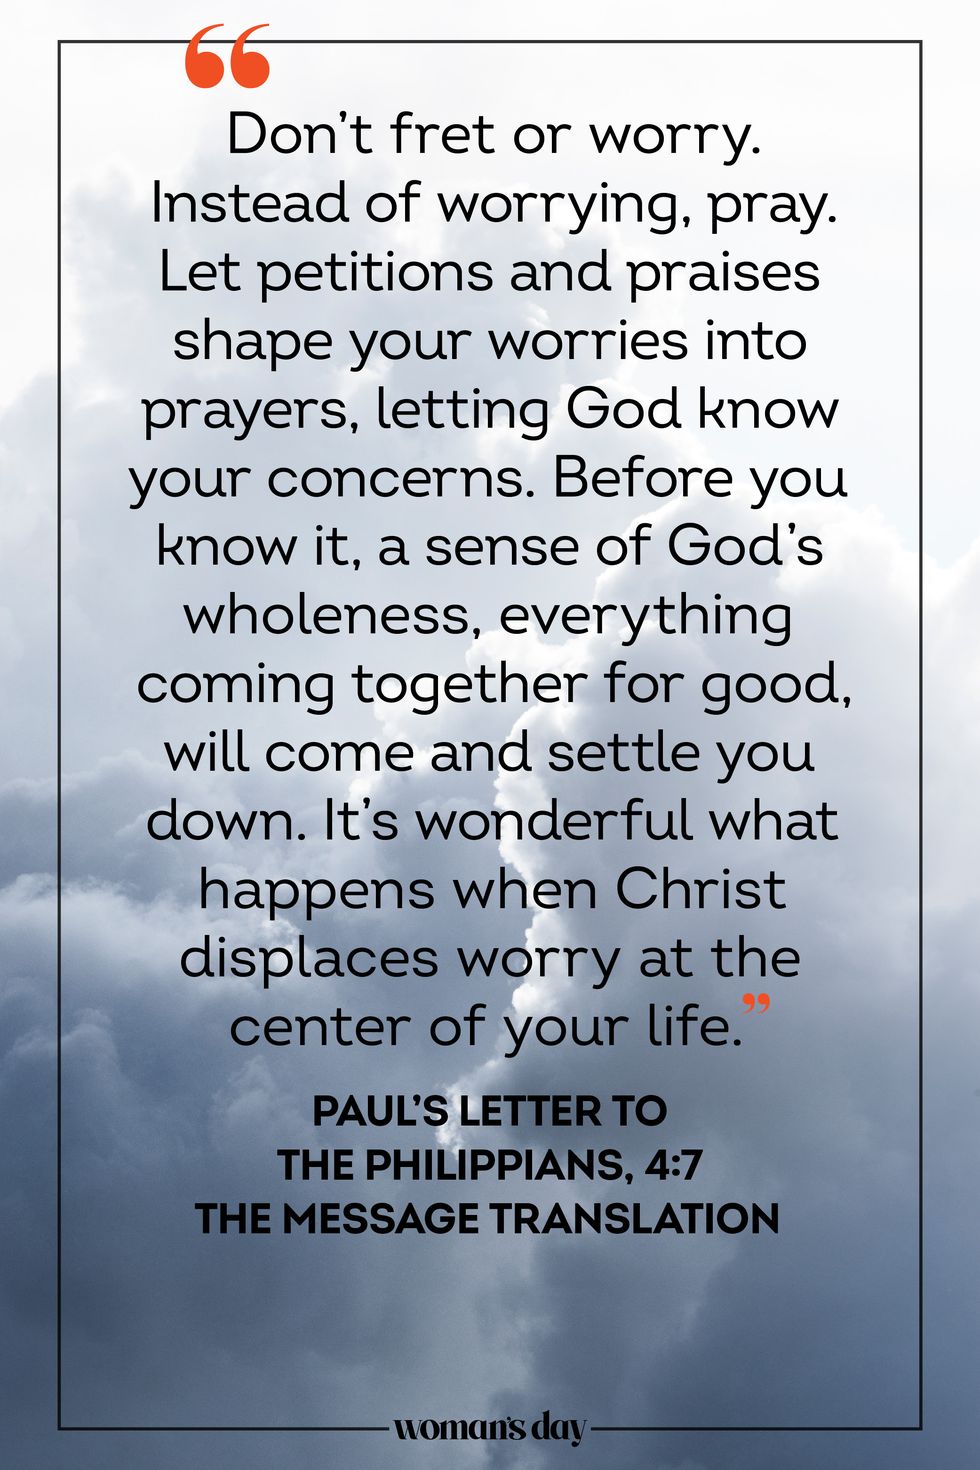 prayer for cancer  pauls letter to the philippians  4 7 the message translation